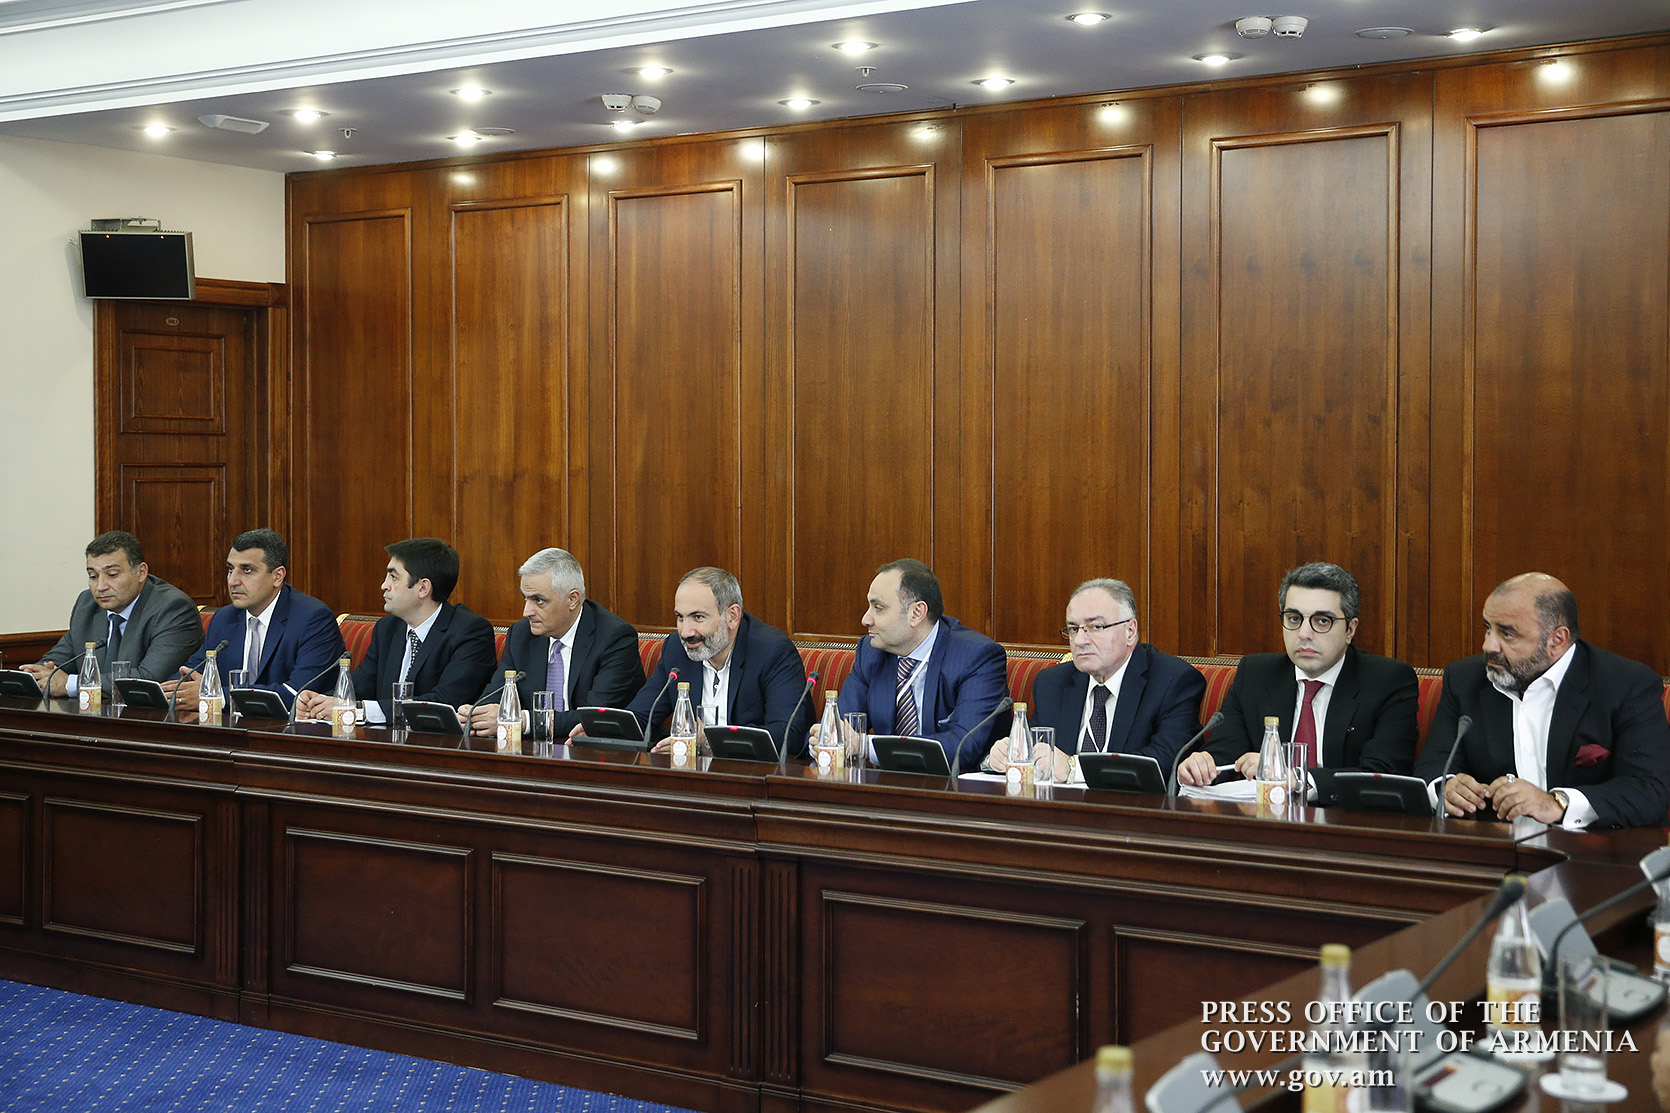 ‘Let us try investing money the way it could generate added value’ – PM meets with Armenian businessmen in St. Petersburg